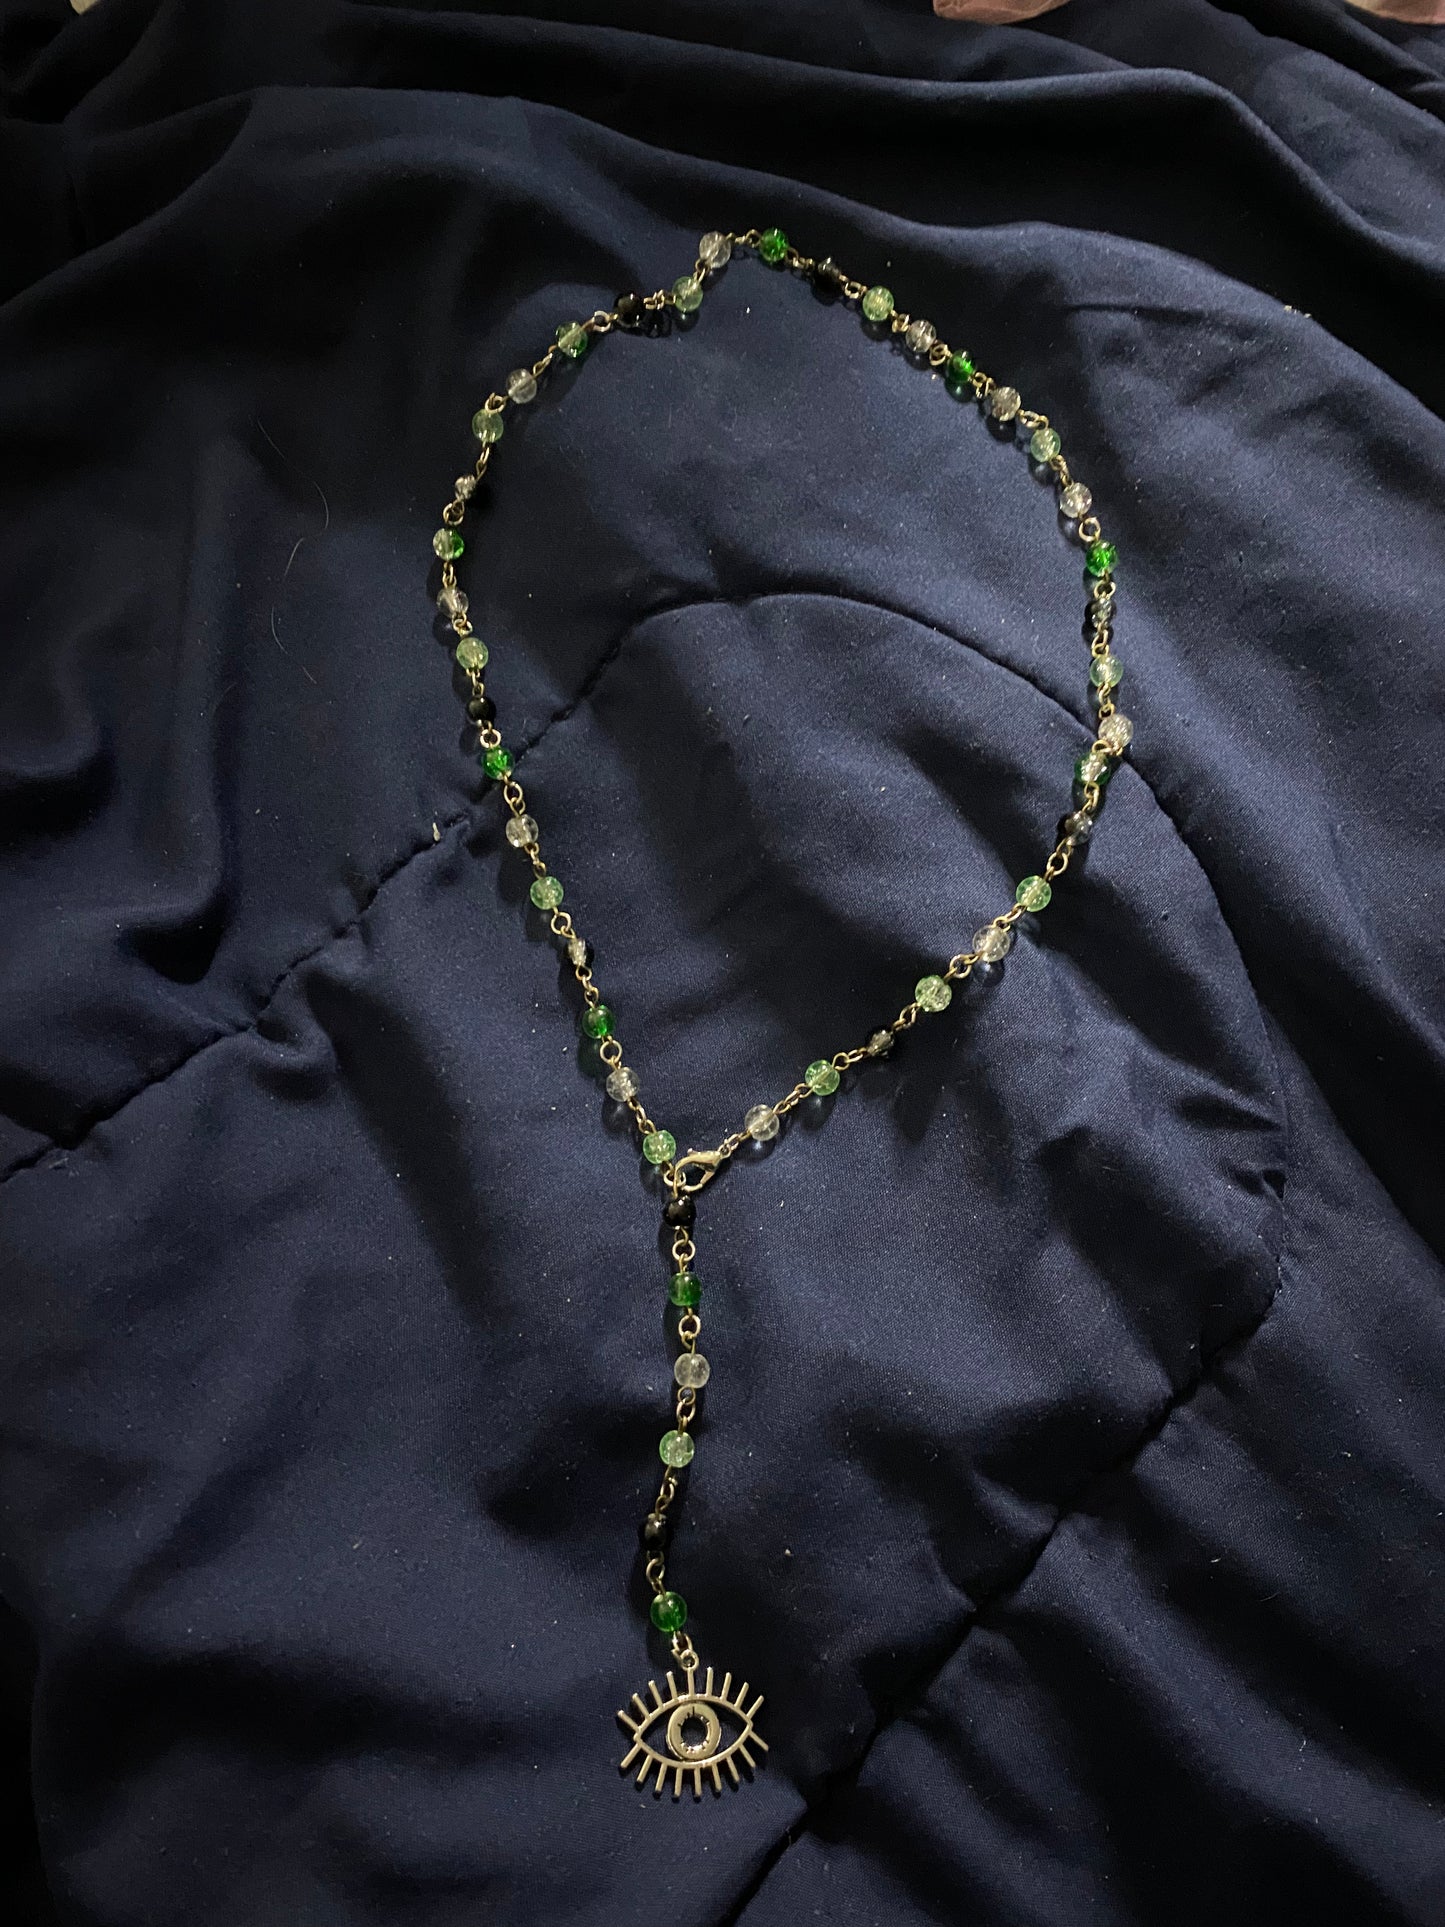 Entity Inspired Rosary: The Beholding